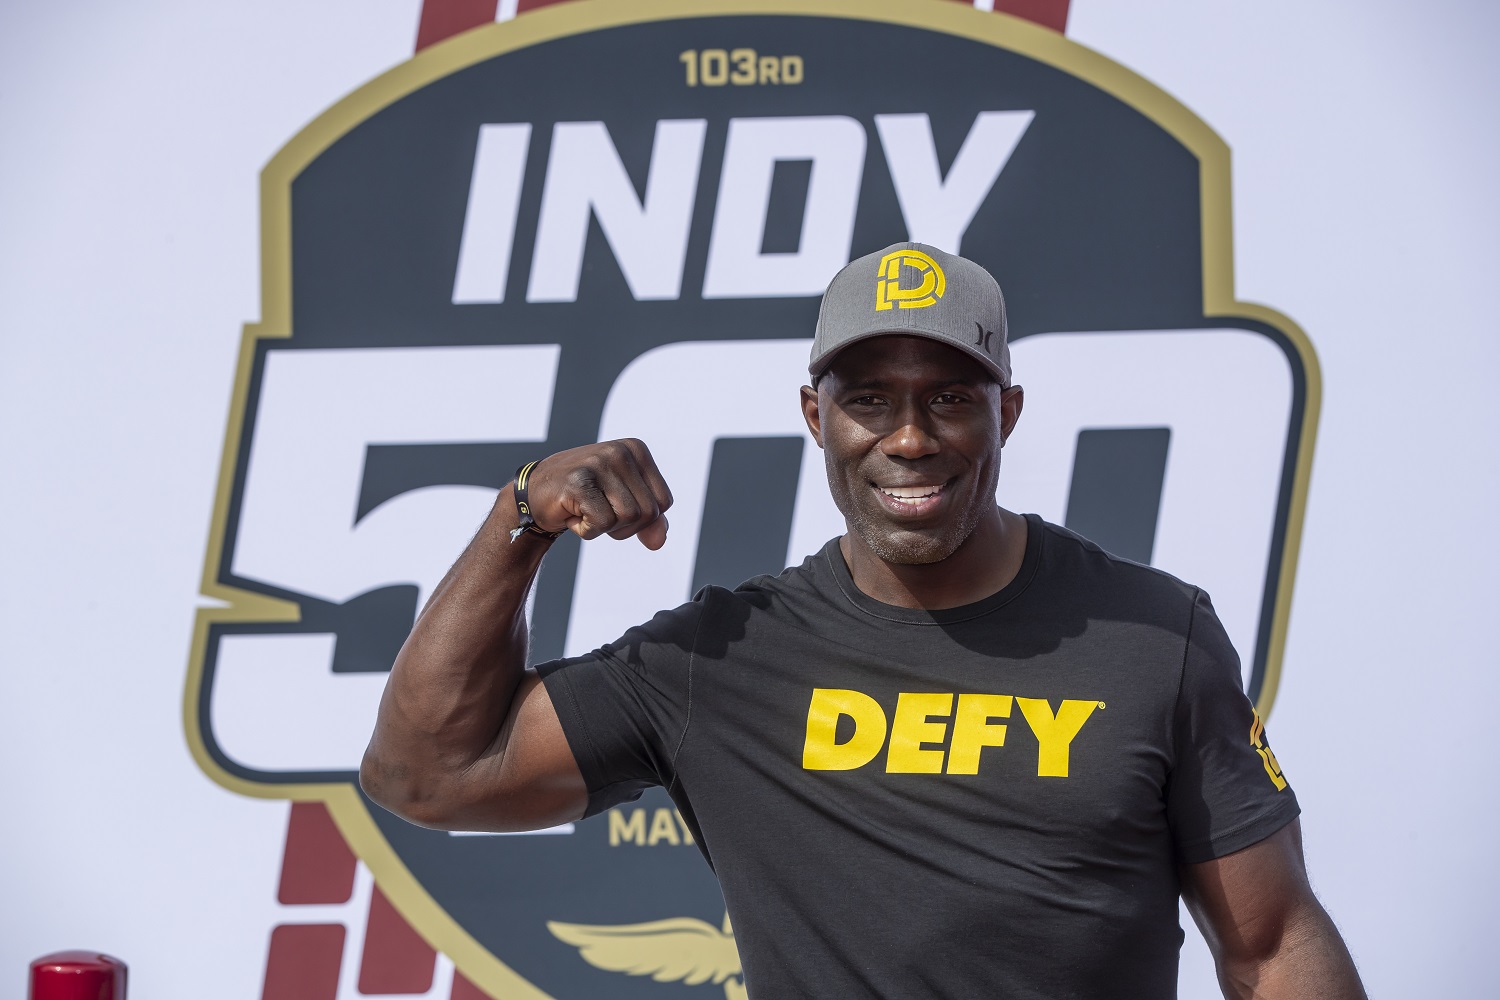 Terrell Davis' CBD drink company got involved in an IndyCar series sponsorship in 2019. | Michael Hickey/Getty Images